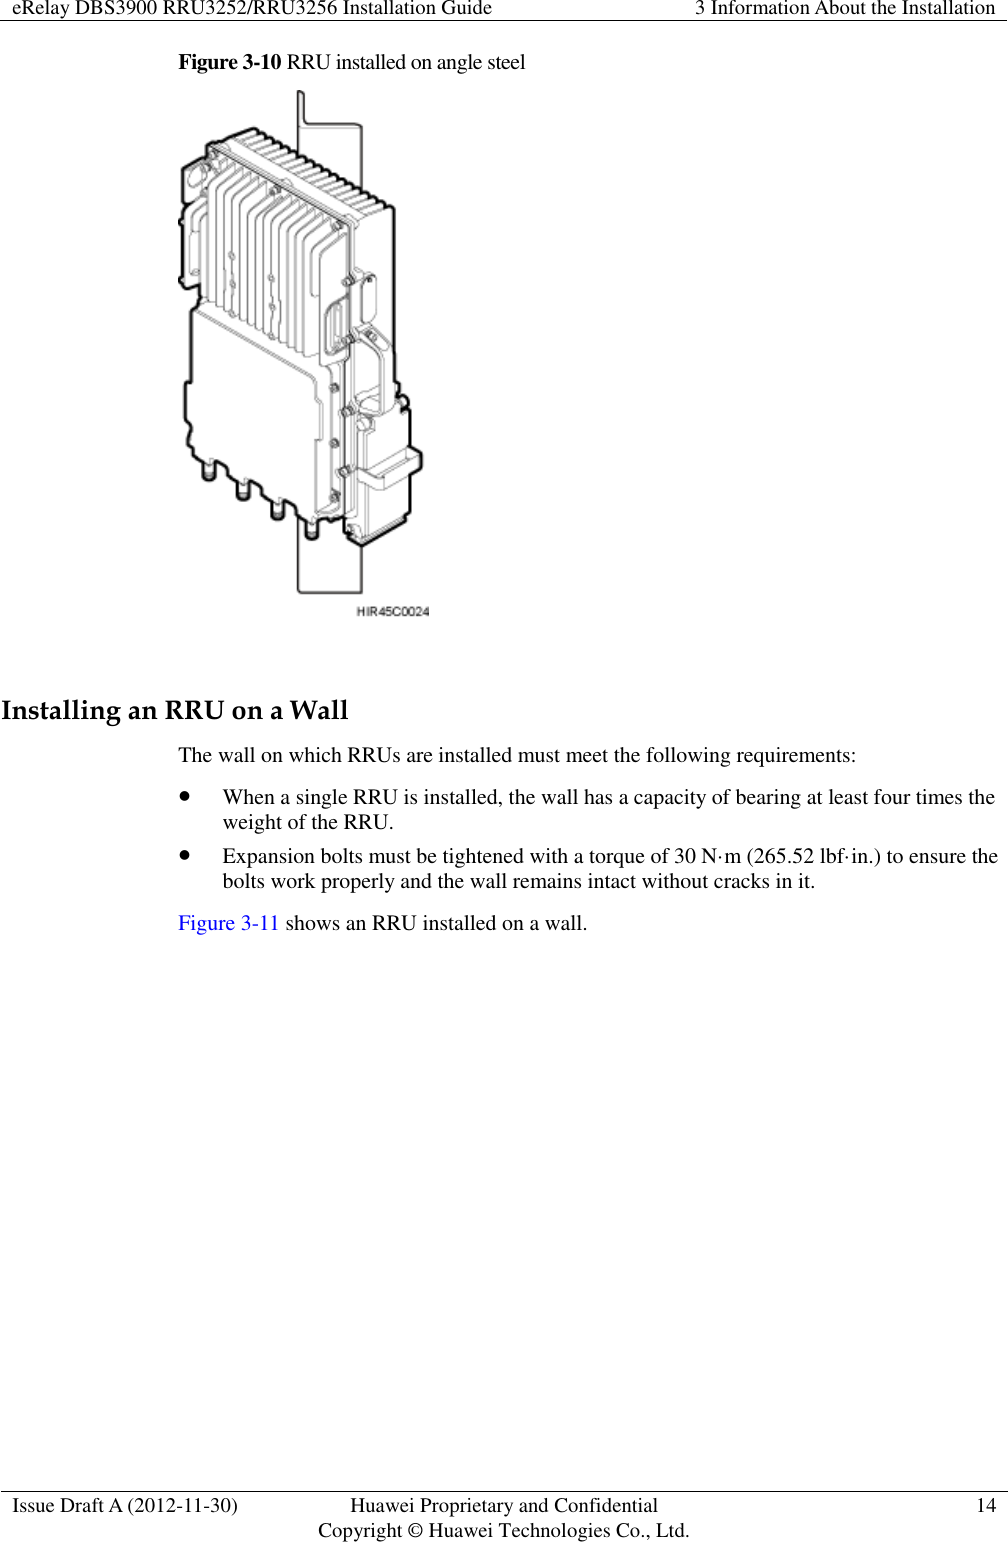 eRelay DBS3900 RRU3252/RRU3256 Installation Guide 3 Information About the Installation  Issue Draft A (2012-11-30) Huawei Proprietary and Confidential                                     Copyright © Huawei Technologies Co., Ltd. 14  Figure 3-10 RRU installed on angle steel   Installing an RRU on a Wall The wall on which RRUs are installed must meet the following requirements:    When a single RRU is installed, the wall has a capacity of bearing at least four times the weight of the RRU.  Expansion bolts must be tightened with a torque of 30 N·m (265.52 lbf·in.) to ensure the bolts work properly and the wall remains intact without cracks in it. Figure 3-11 shows an RRU installed on a wall. 